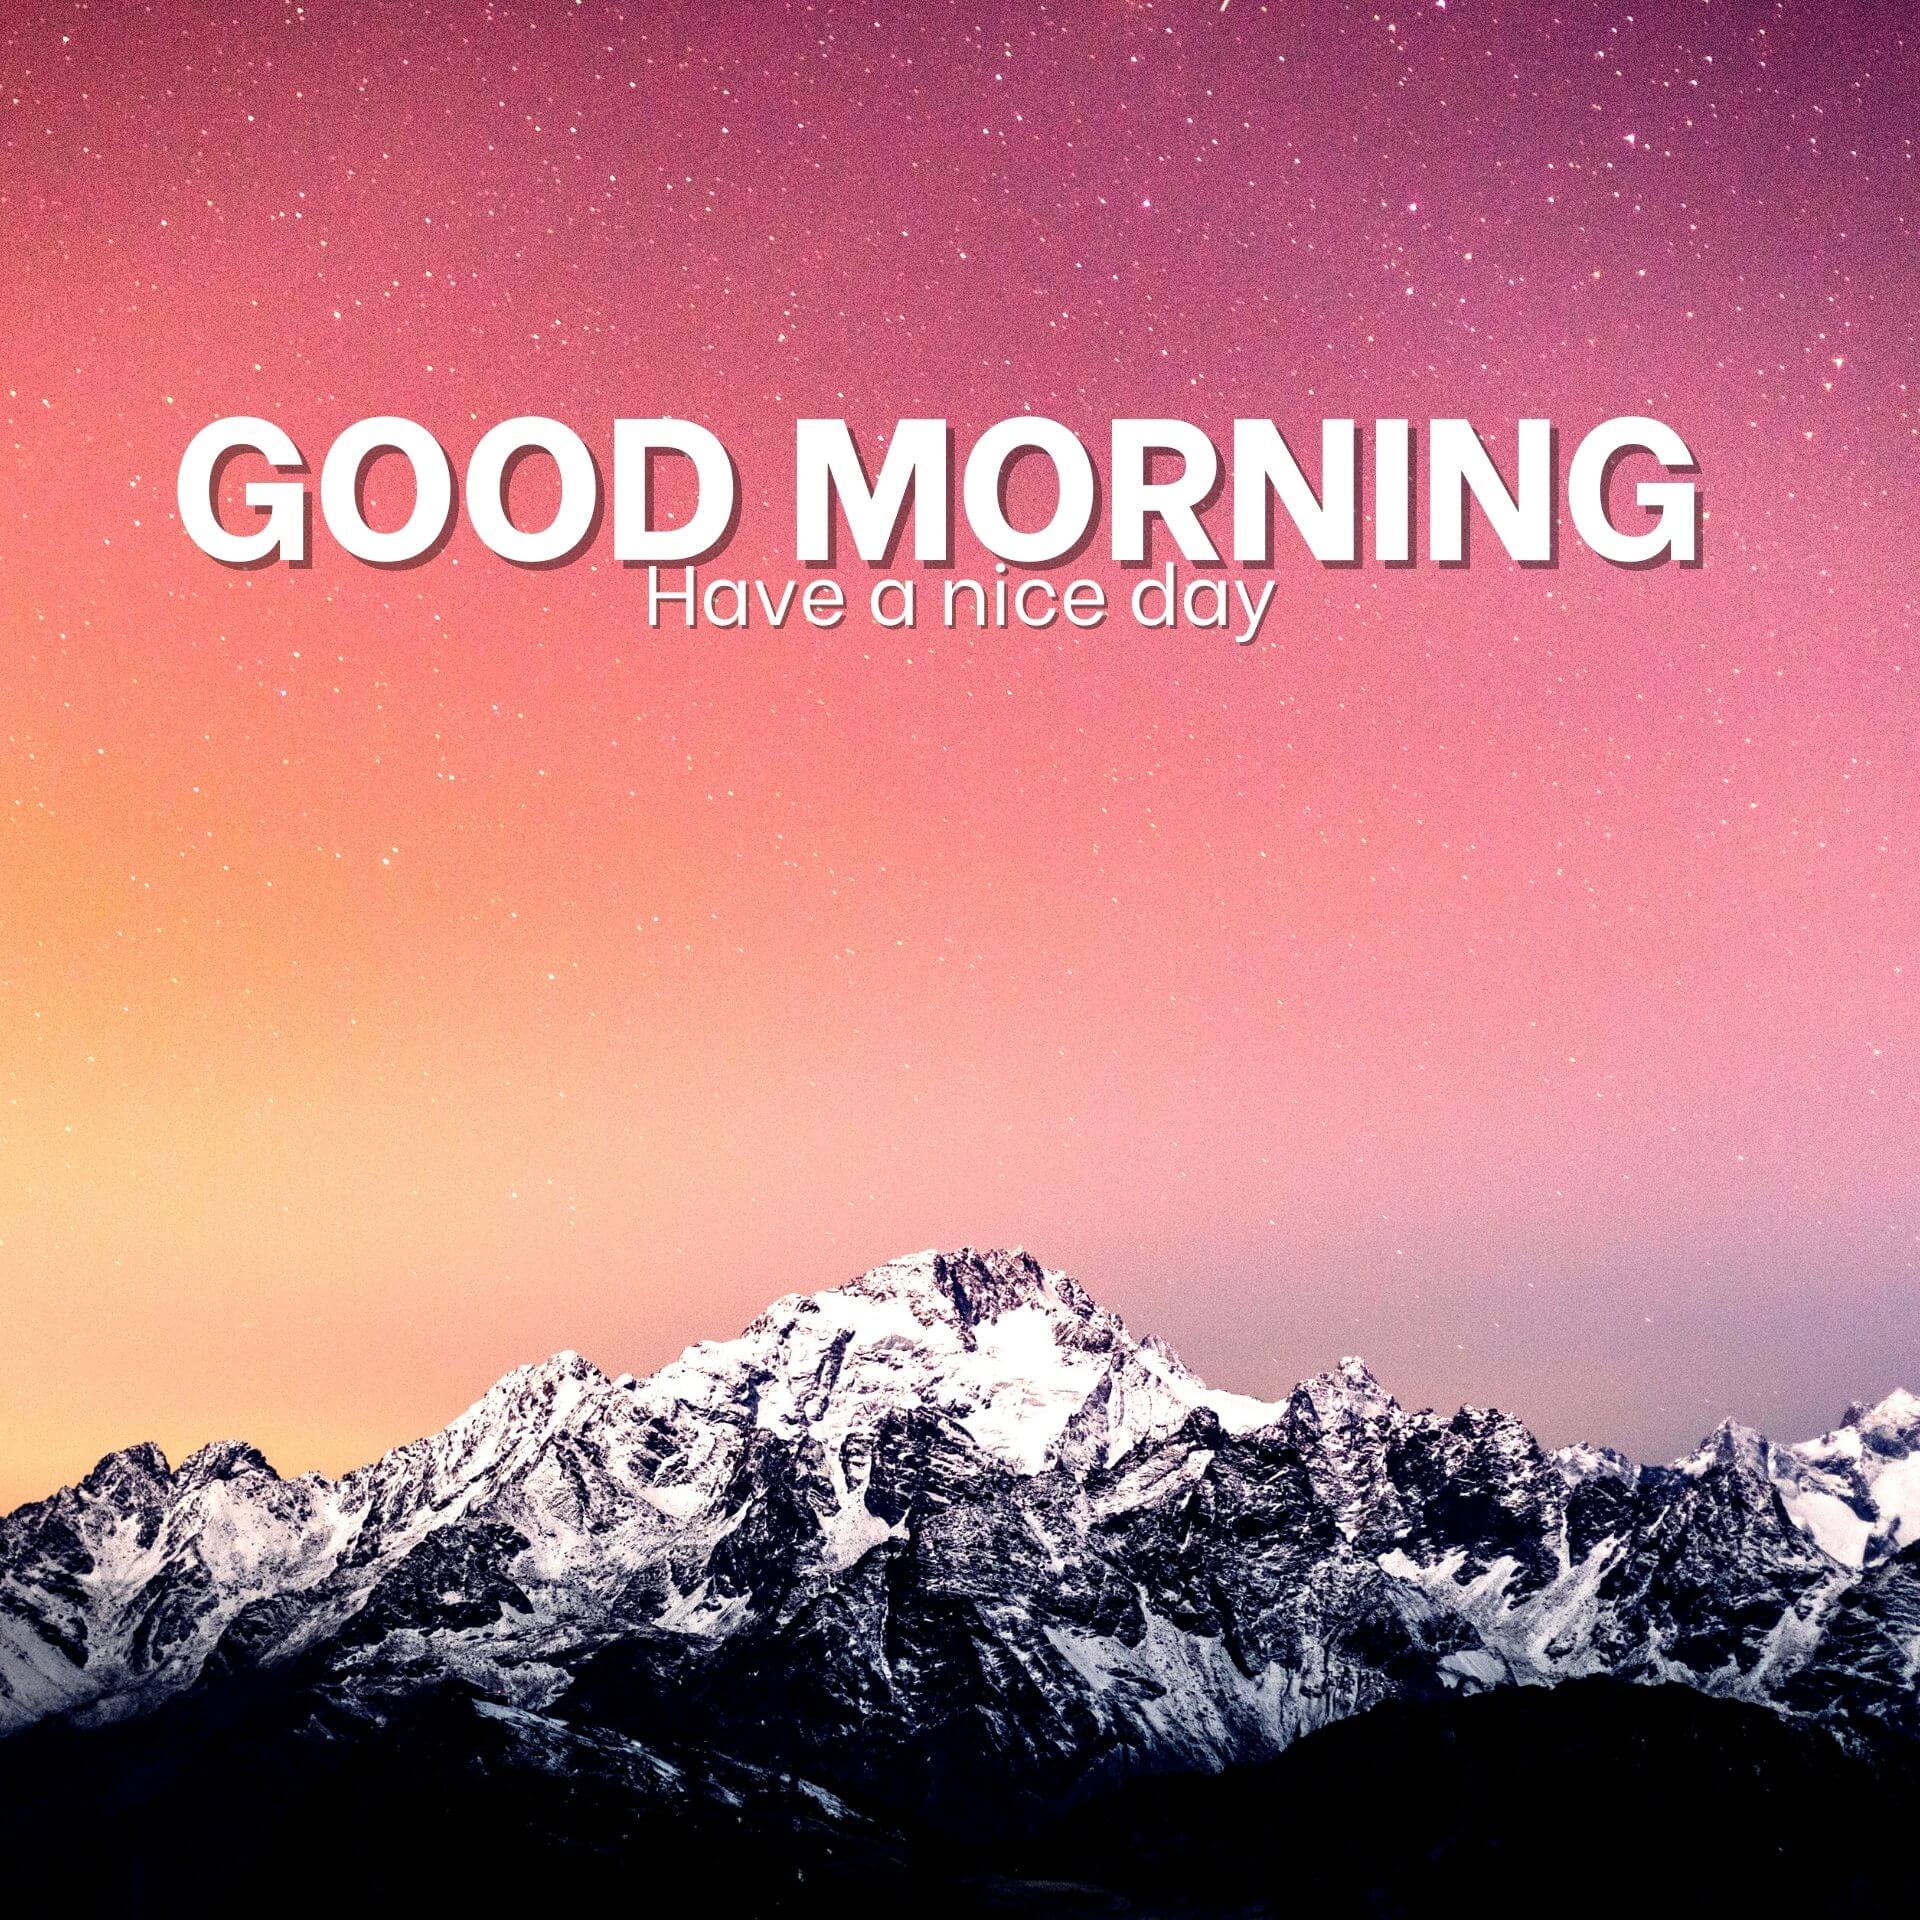 Good morning have a nice day Wallpaper Pics New Download